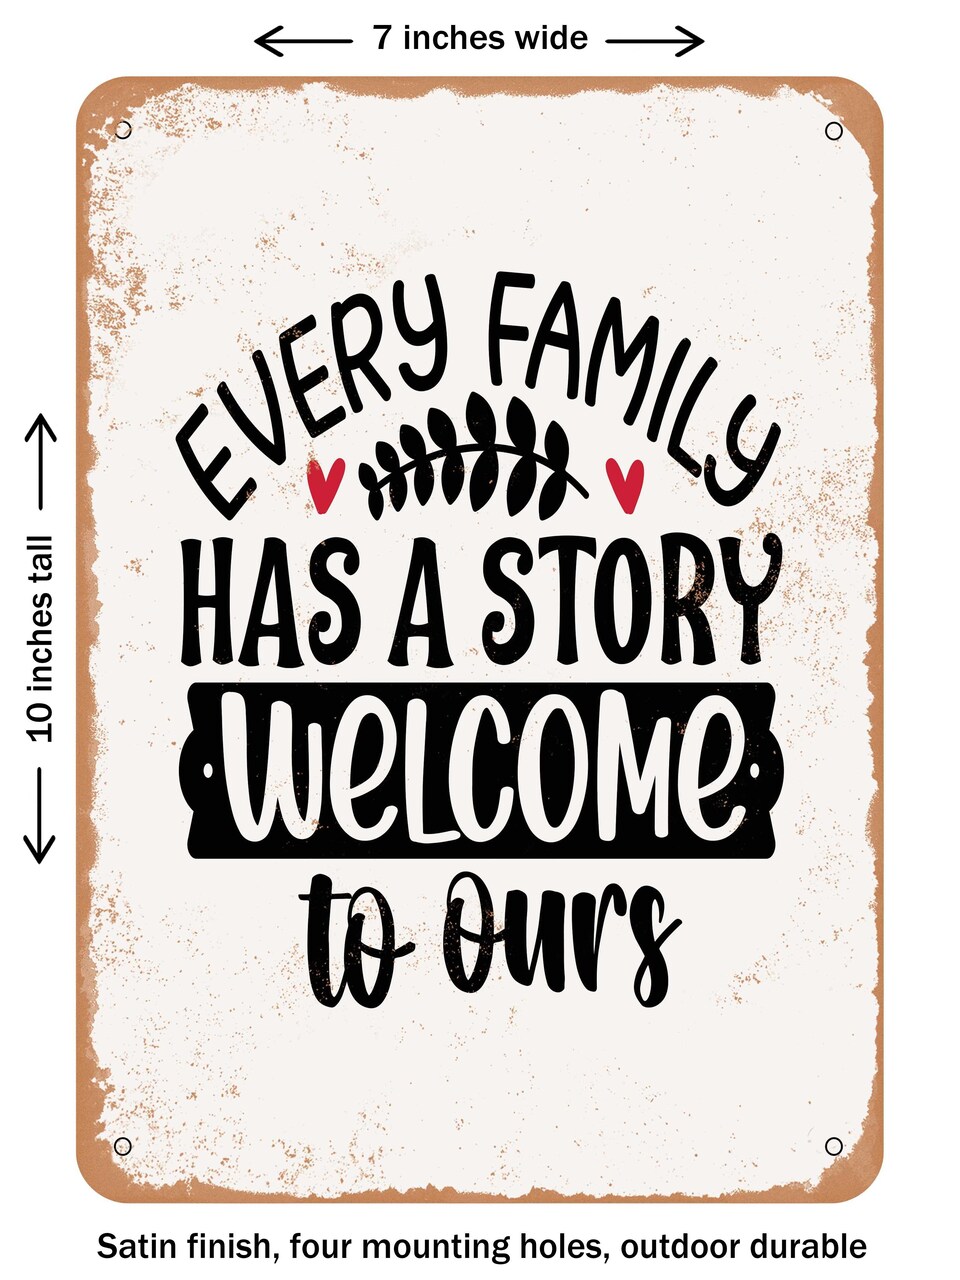 DECORATIVE METAL SIGN - Every Family Has a Story Welcome to Ours  - Vintage Rusty Look